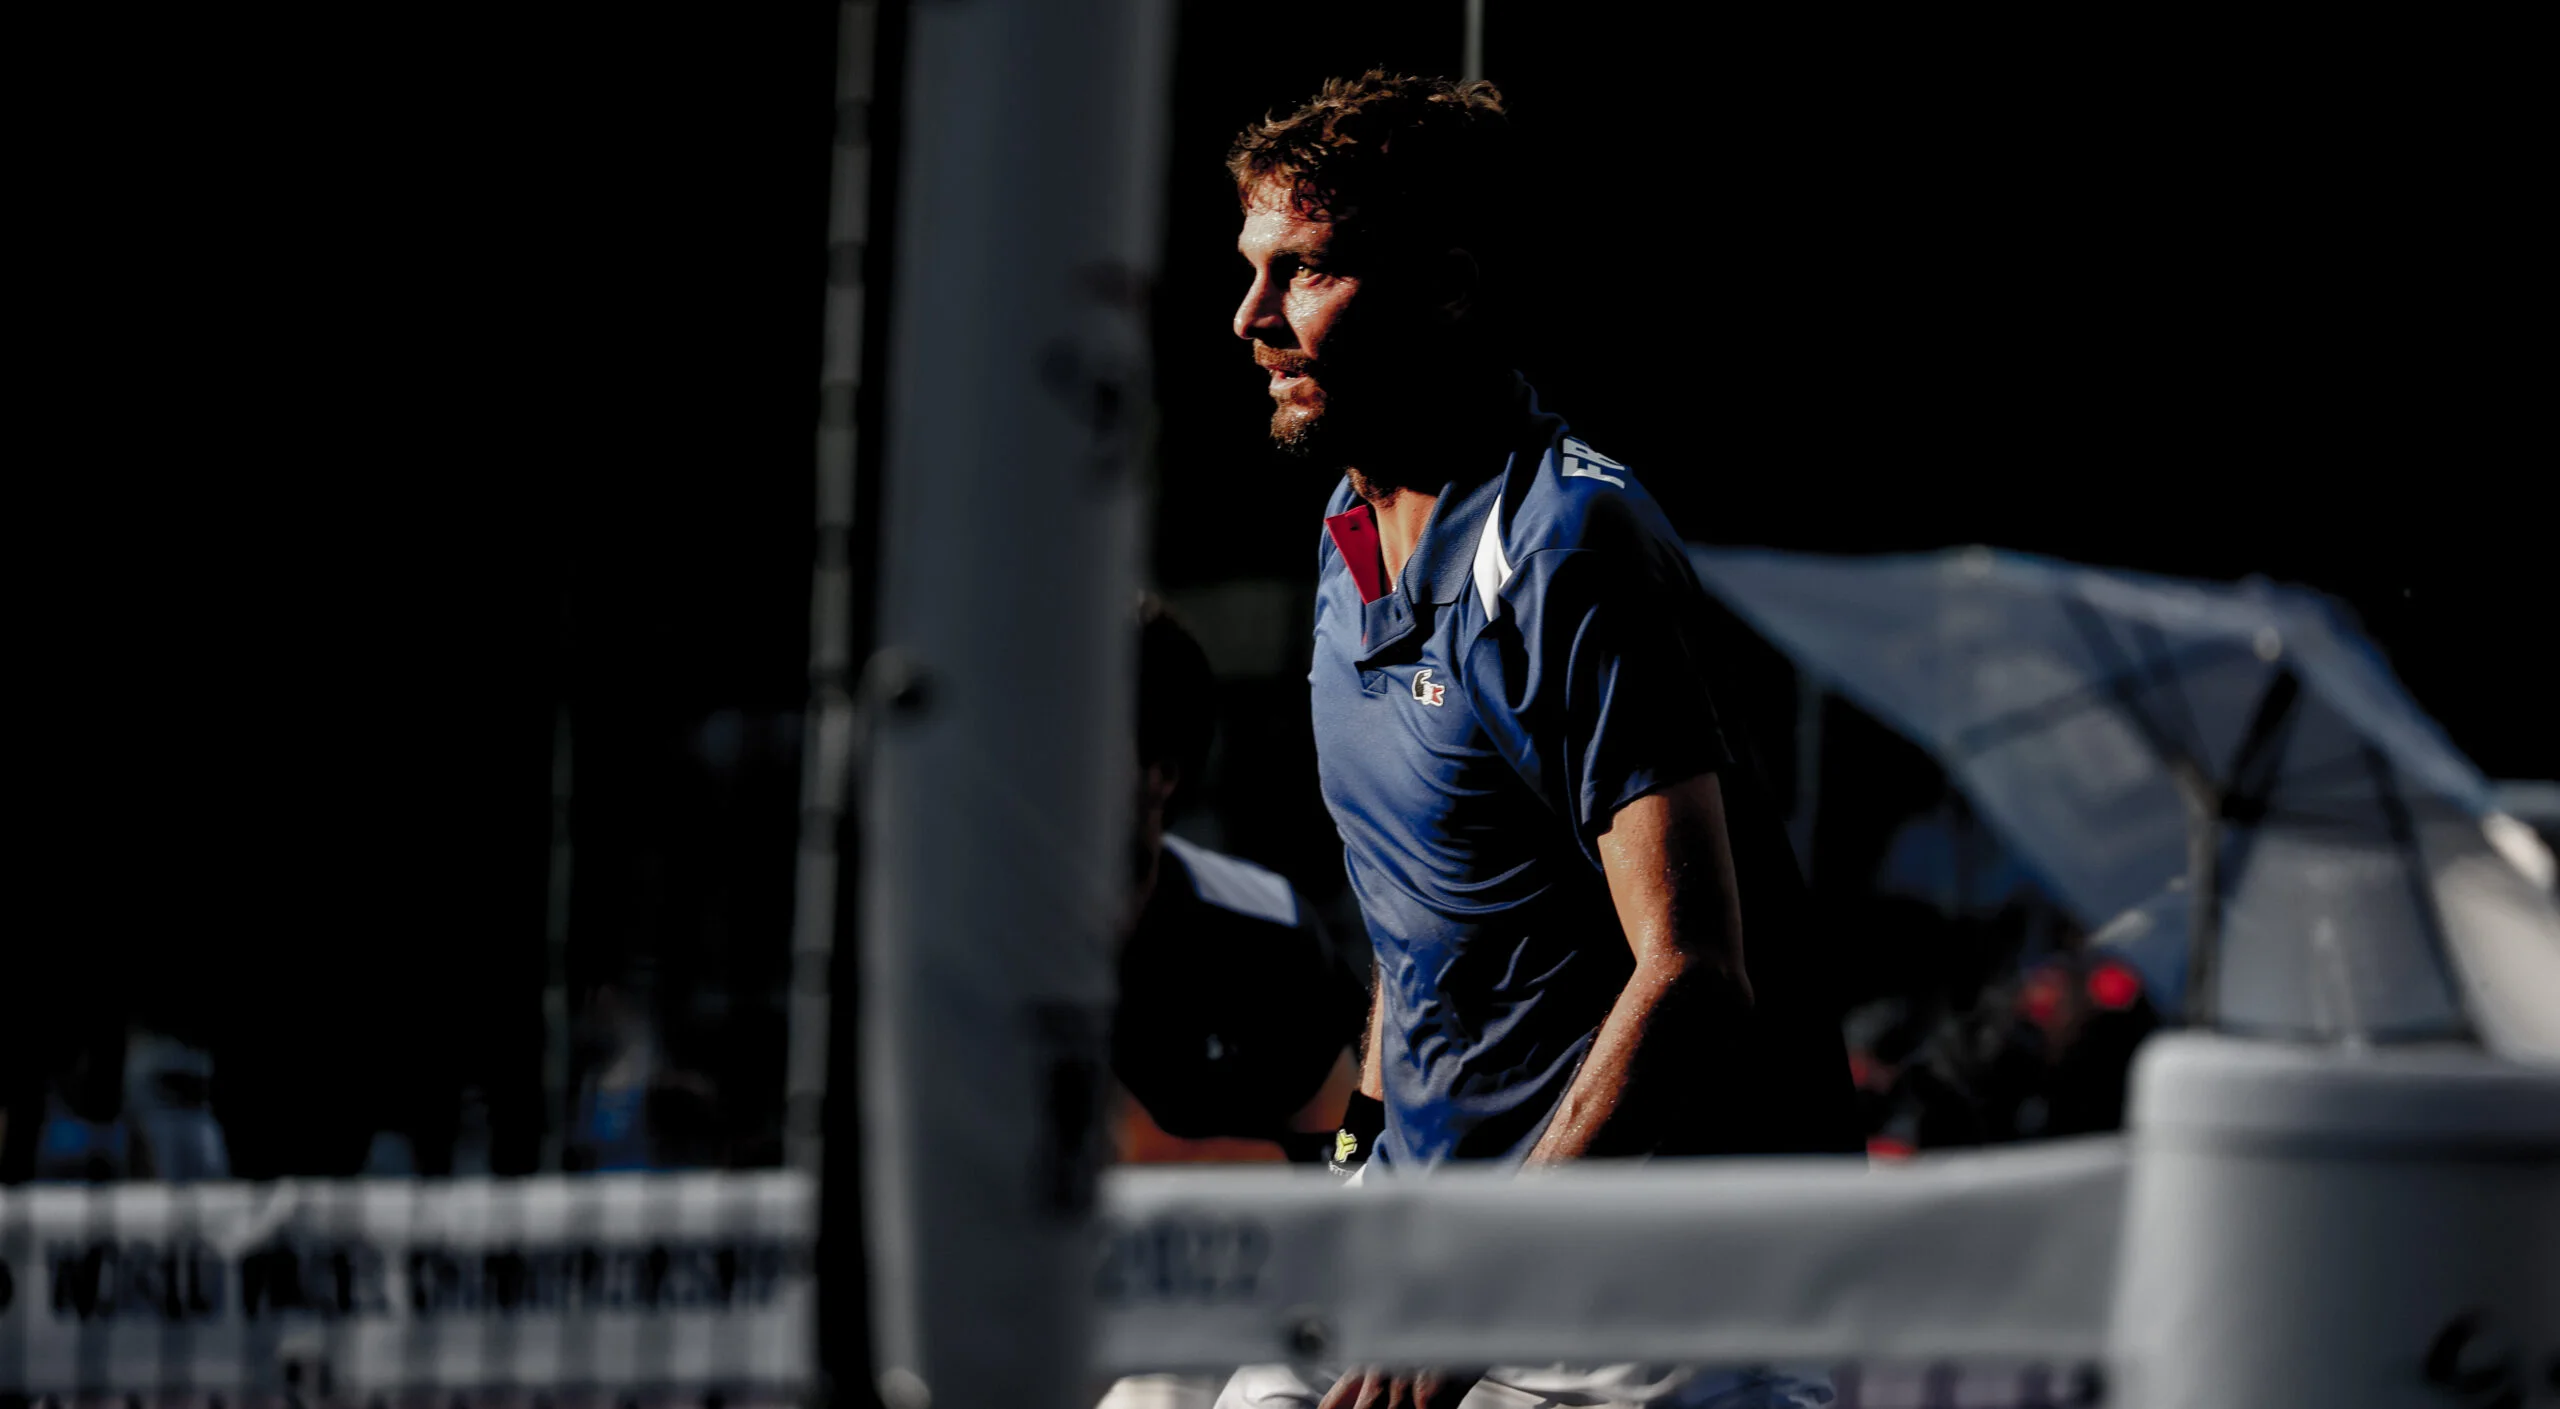 Jérémy Scatena: “I decided to end my career as a football player padel professional"